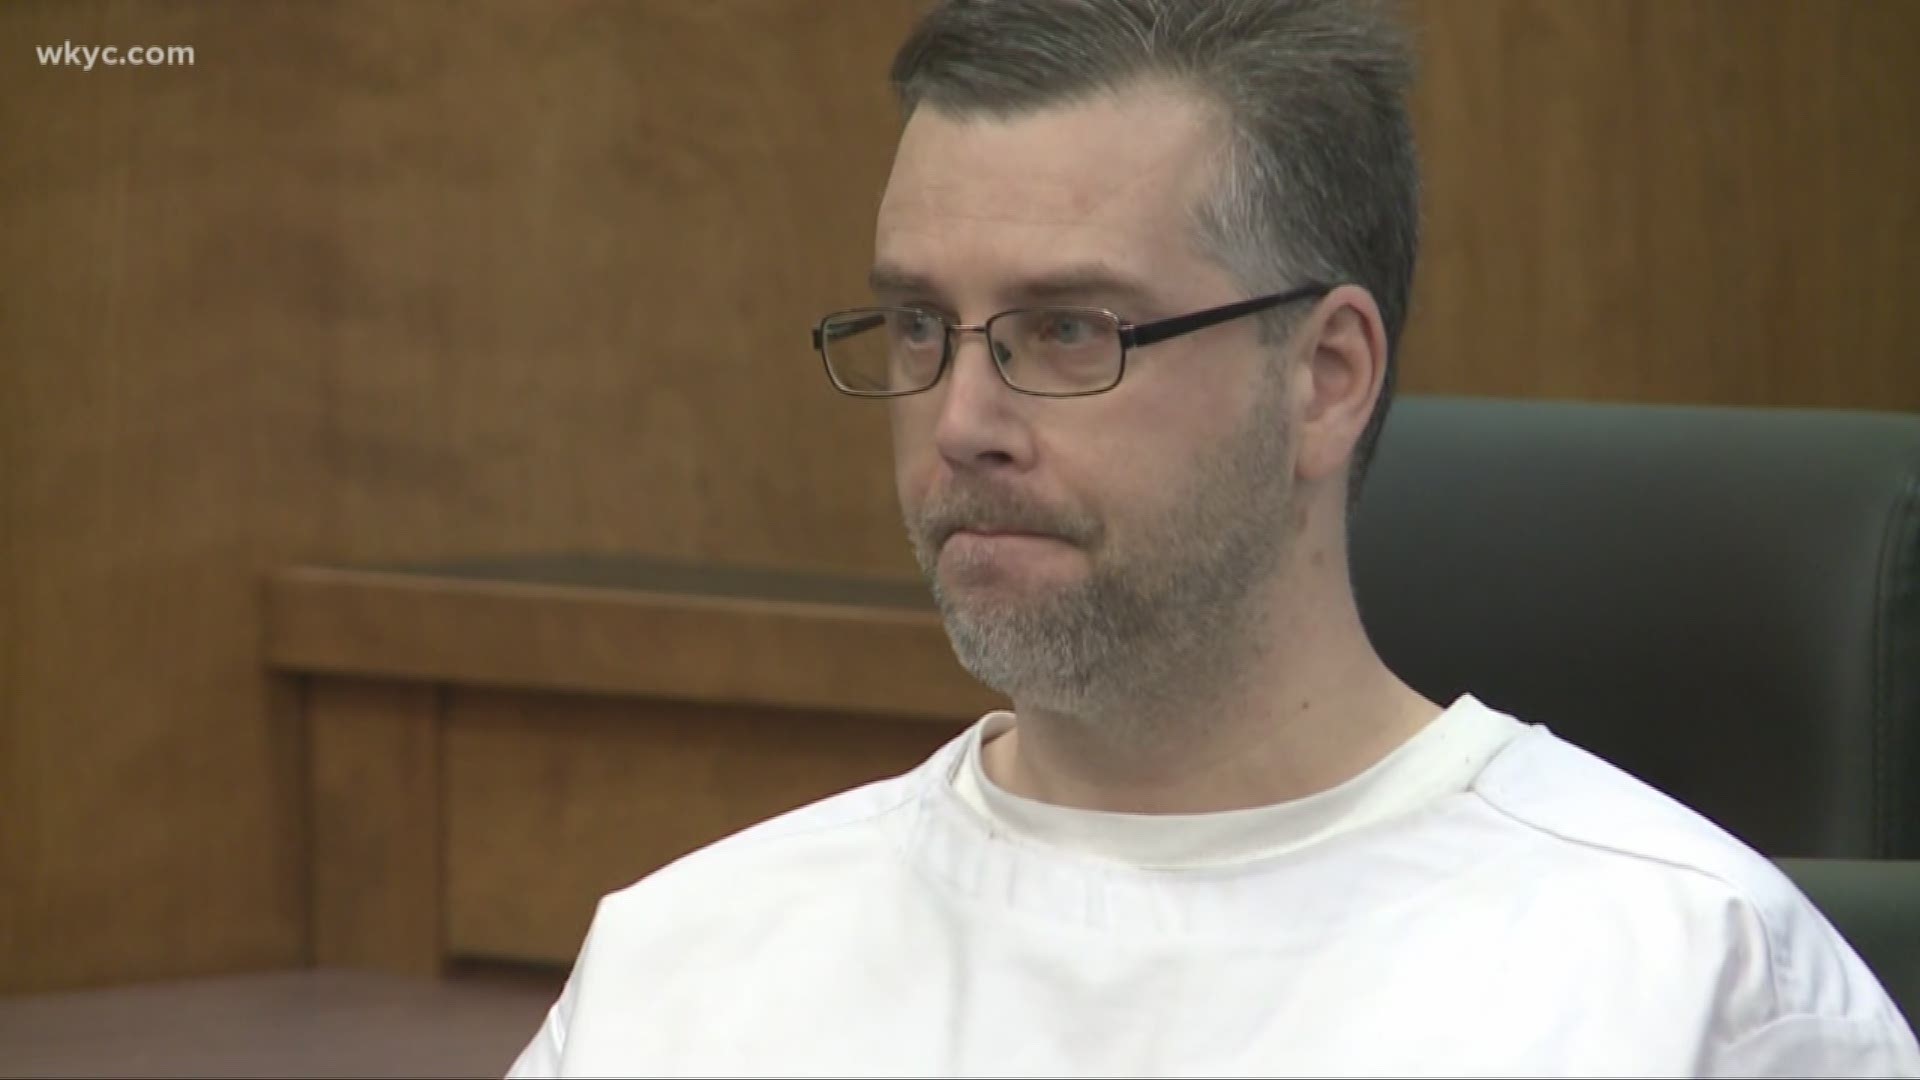 Convicted killer Shawn Grate pleaded guilty to the murder of 23-year-old Dana Lowrey in Marion County Common Pleas Court on Wednesday. Grate entered guilty pleas to charges of aggravated murder, kidnapping, abuse of a corpse and tampering with evidence.